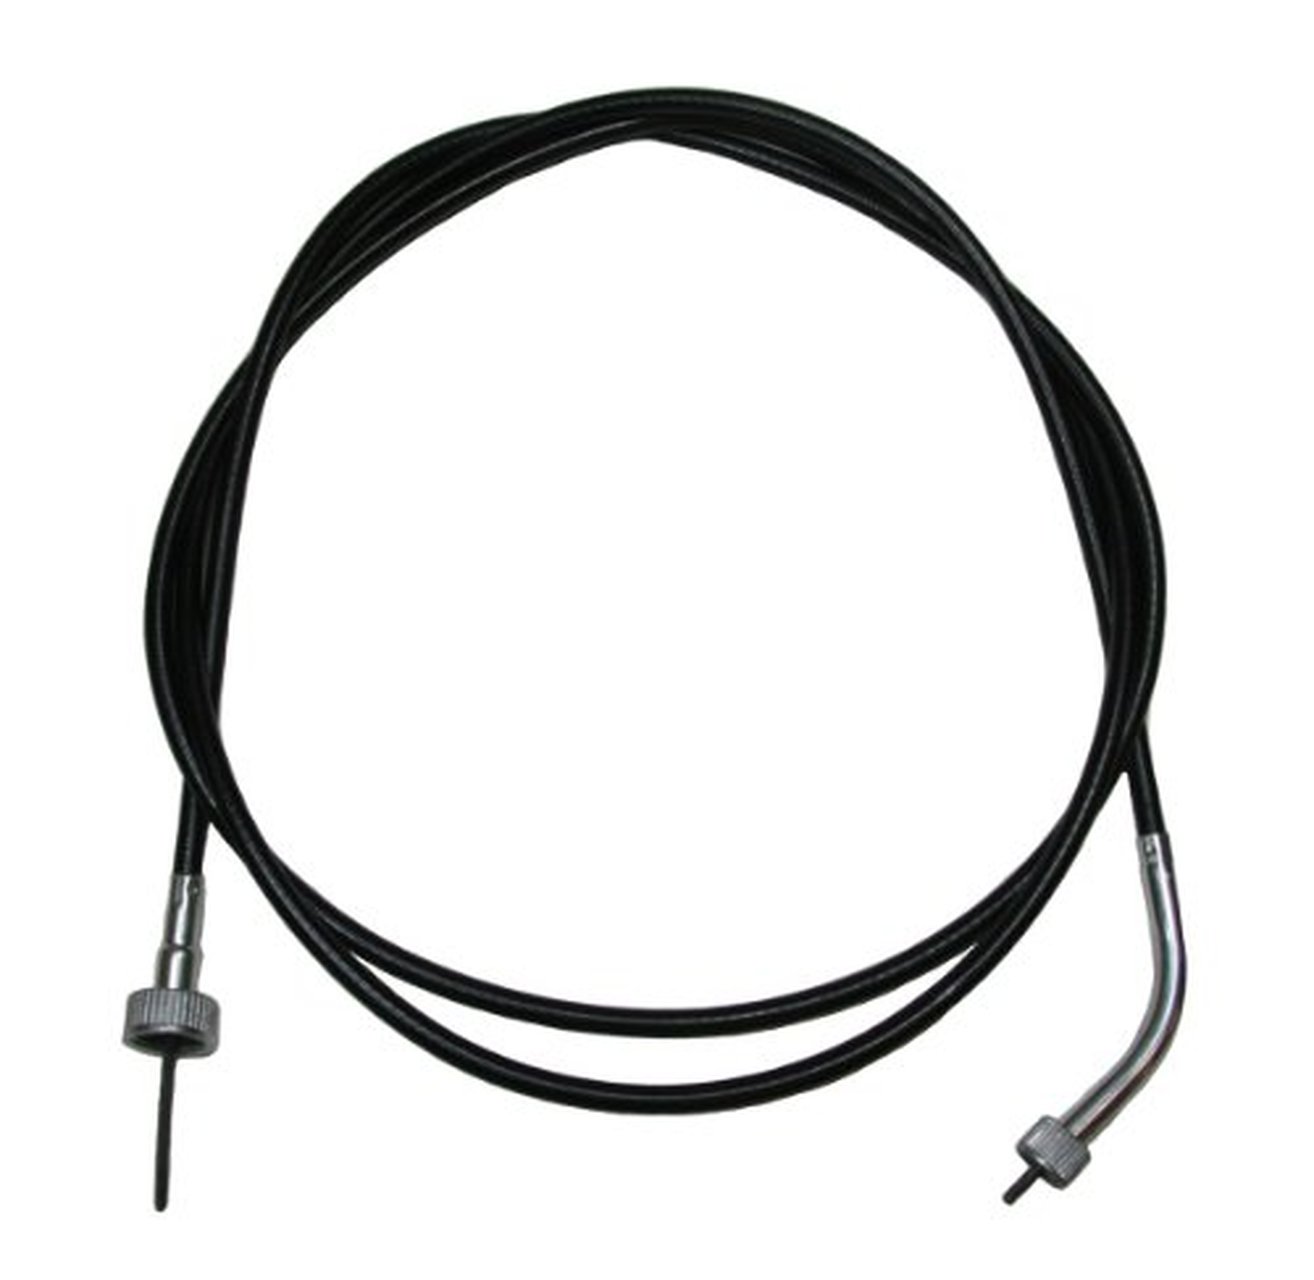 Speedometer Cable Fits 1981 Ski-Doo Blizzard 5500 